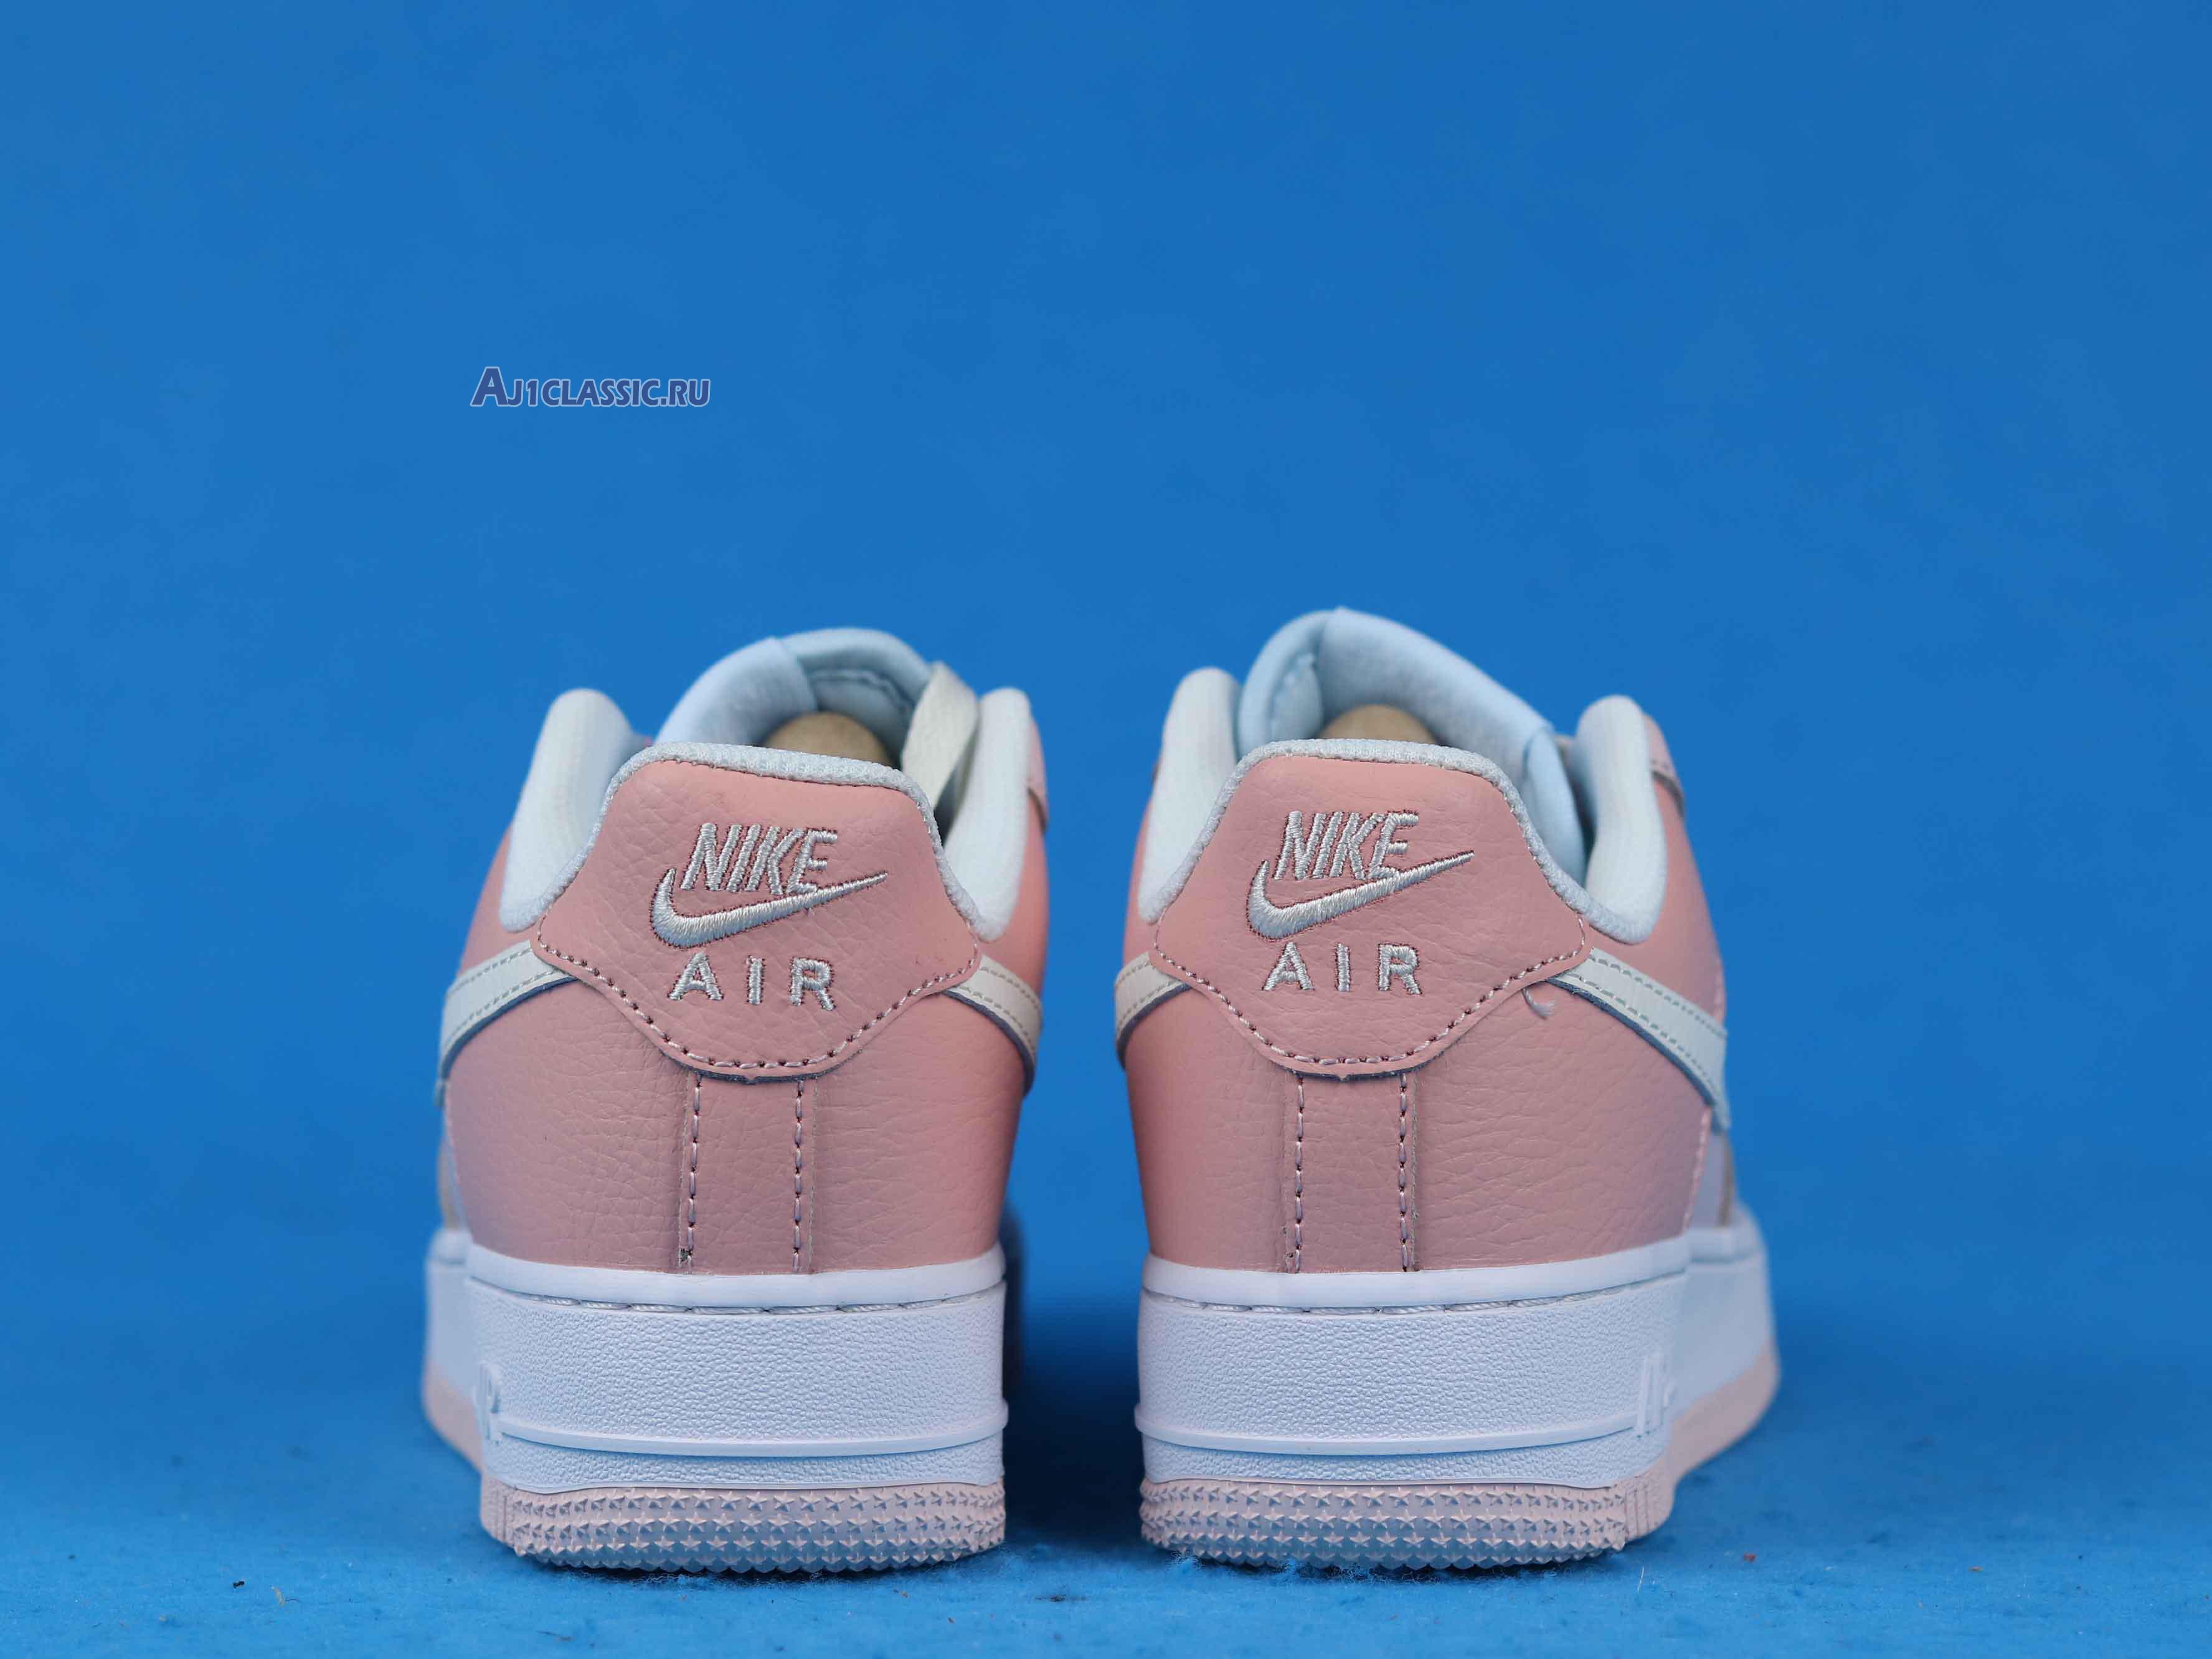 Nike Air Force 1 Low Utility "Force is Female" CK4810-621